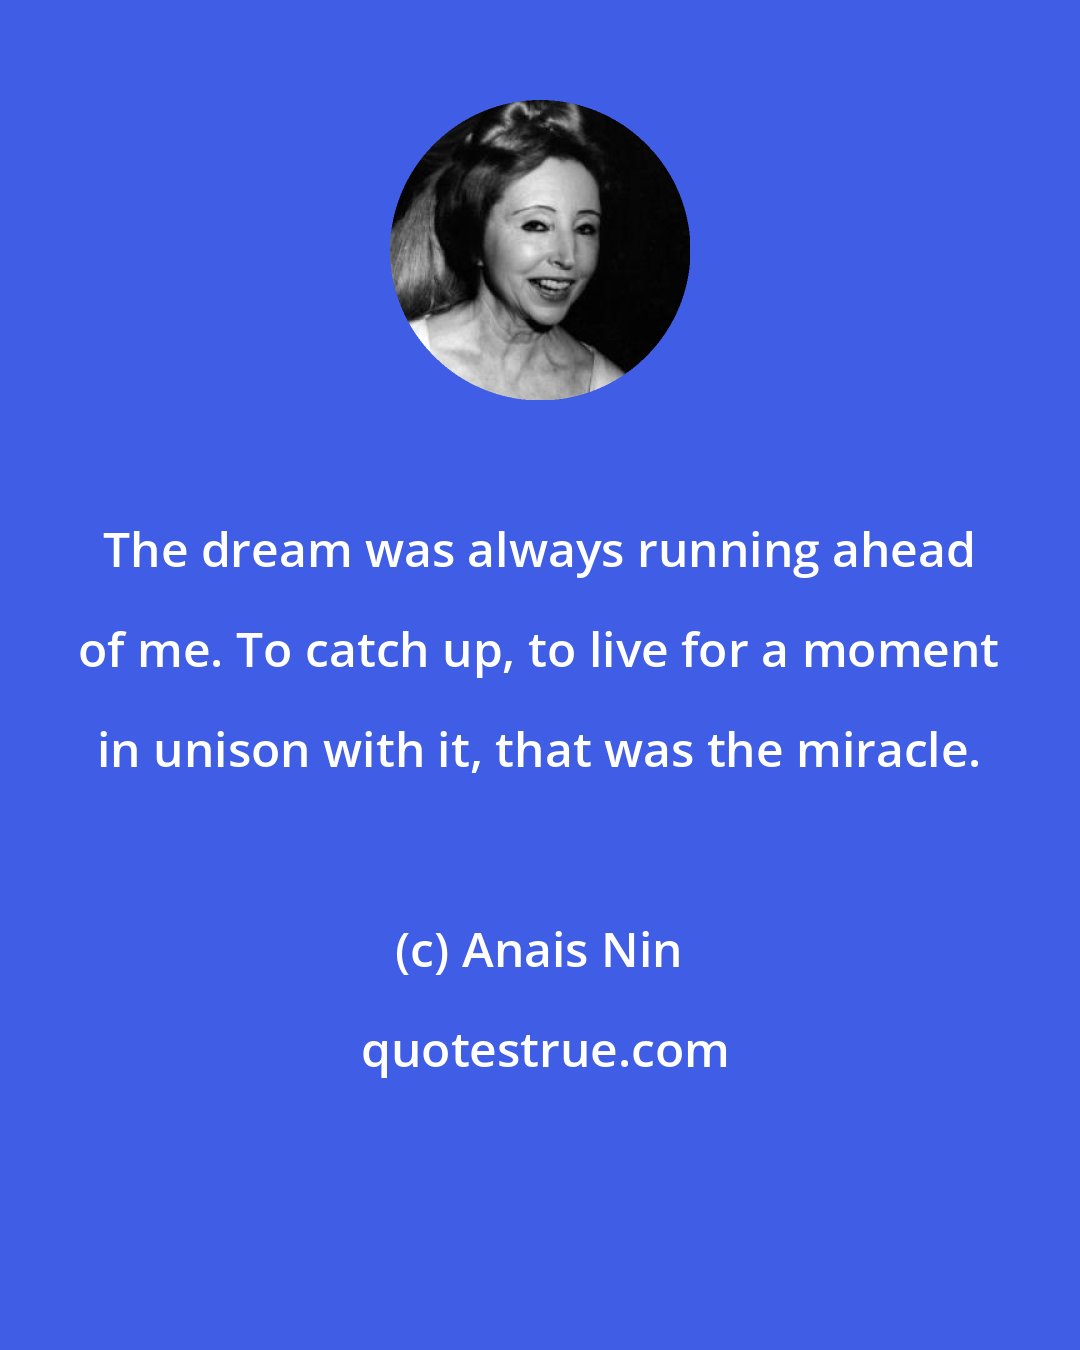 Anais Nin: The dream was always running ahead of me. To catch up, to live for a moment in unison with it, that was the miracle.